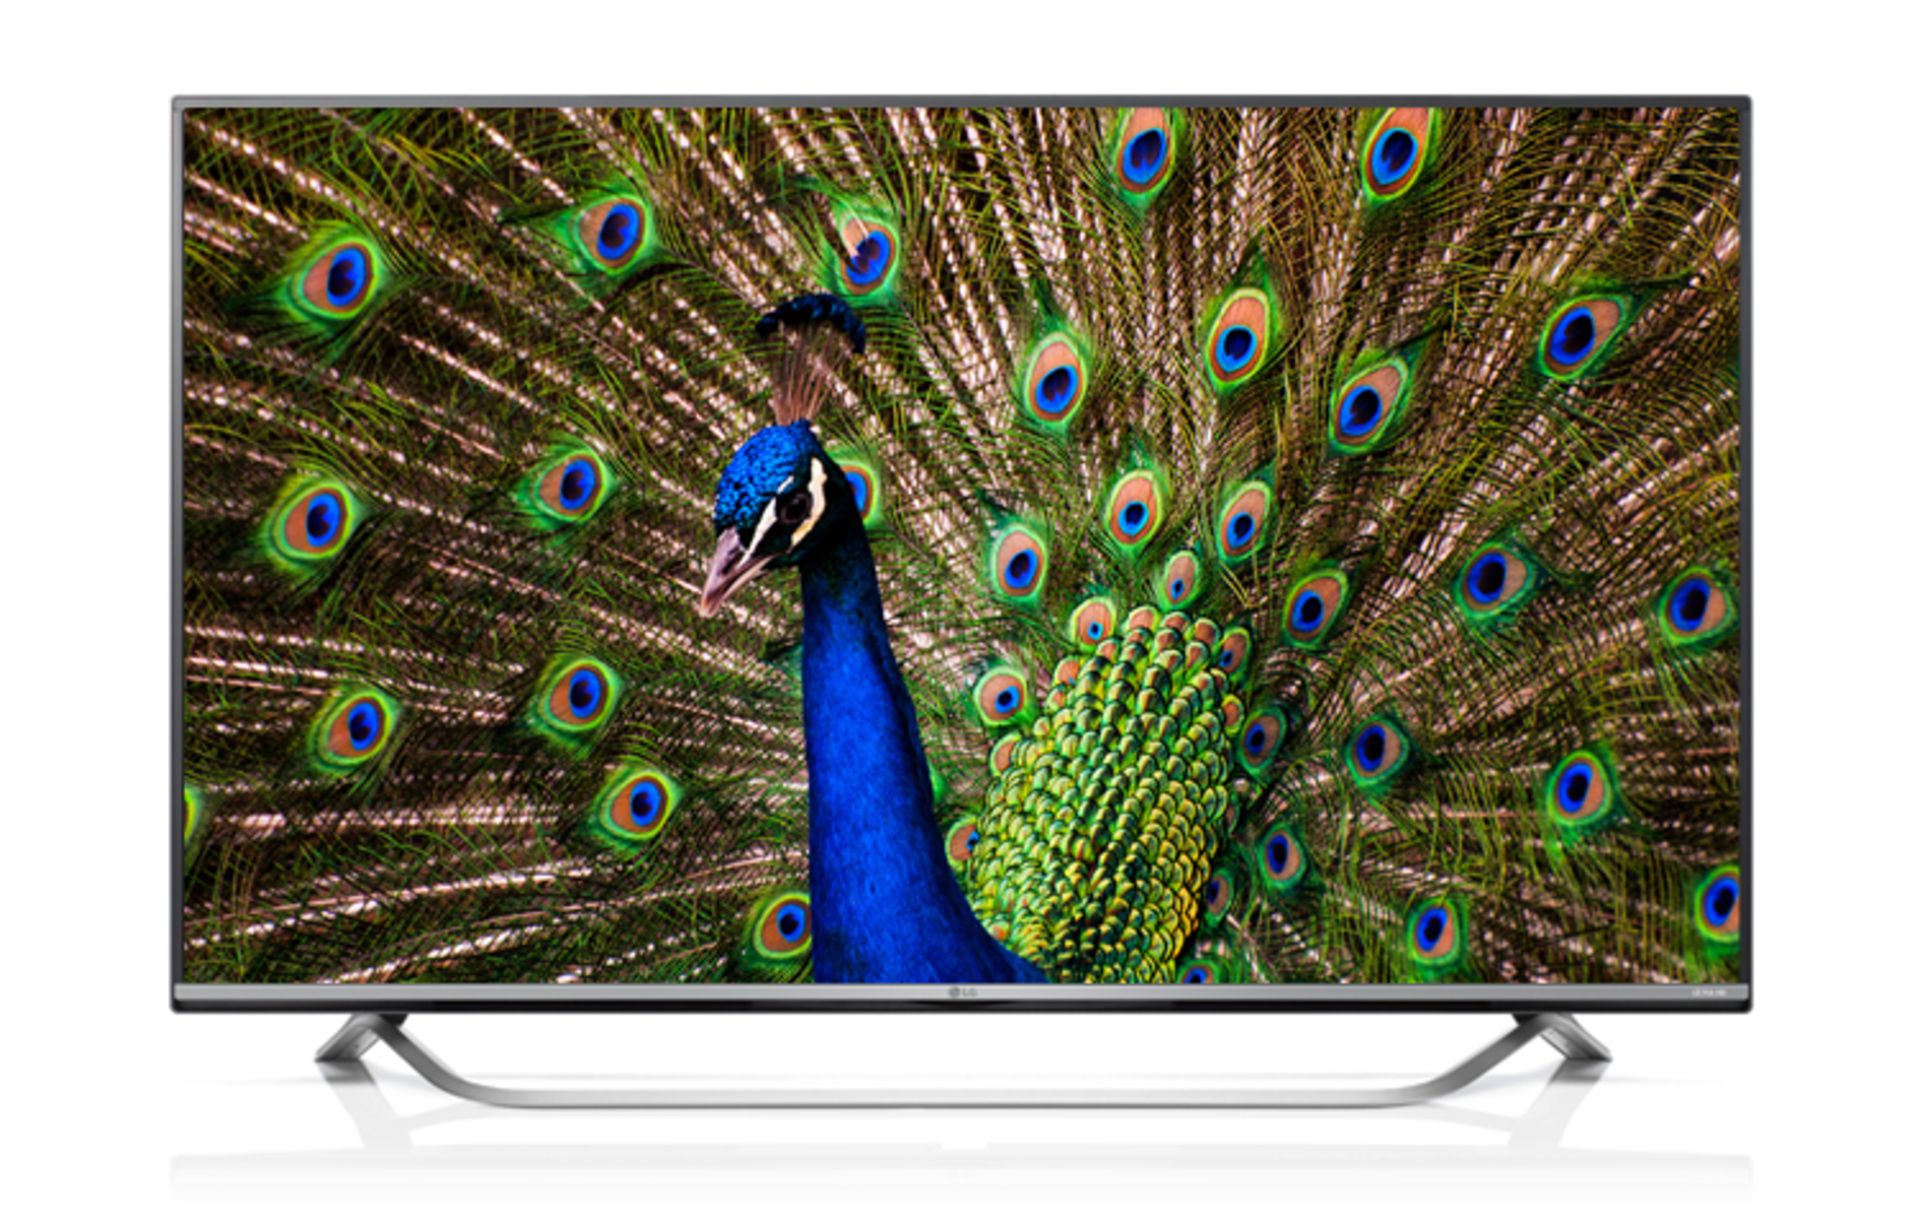 V Grade A 49" 4K ULTRA HD LED SMART TV WITH WEBOS 2.0 & FREEVIEW & WIFI 49UF7787 (Item Will Be